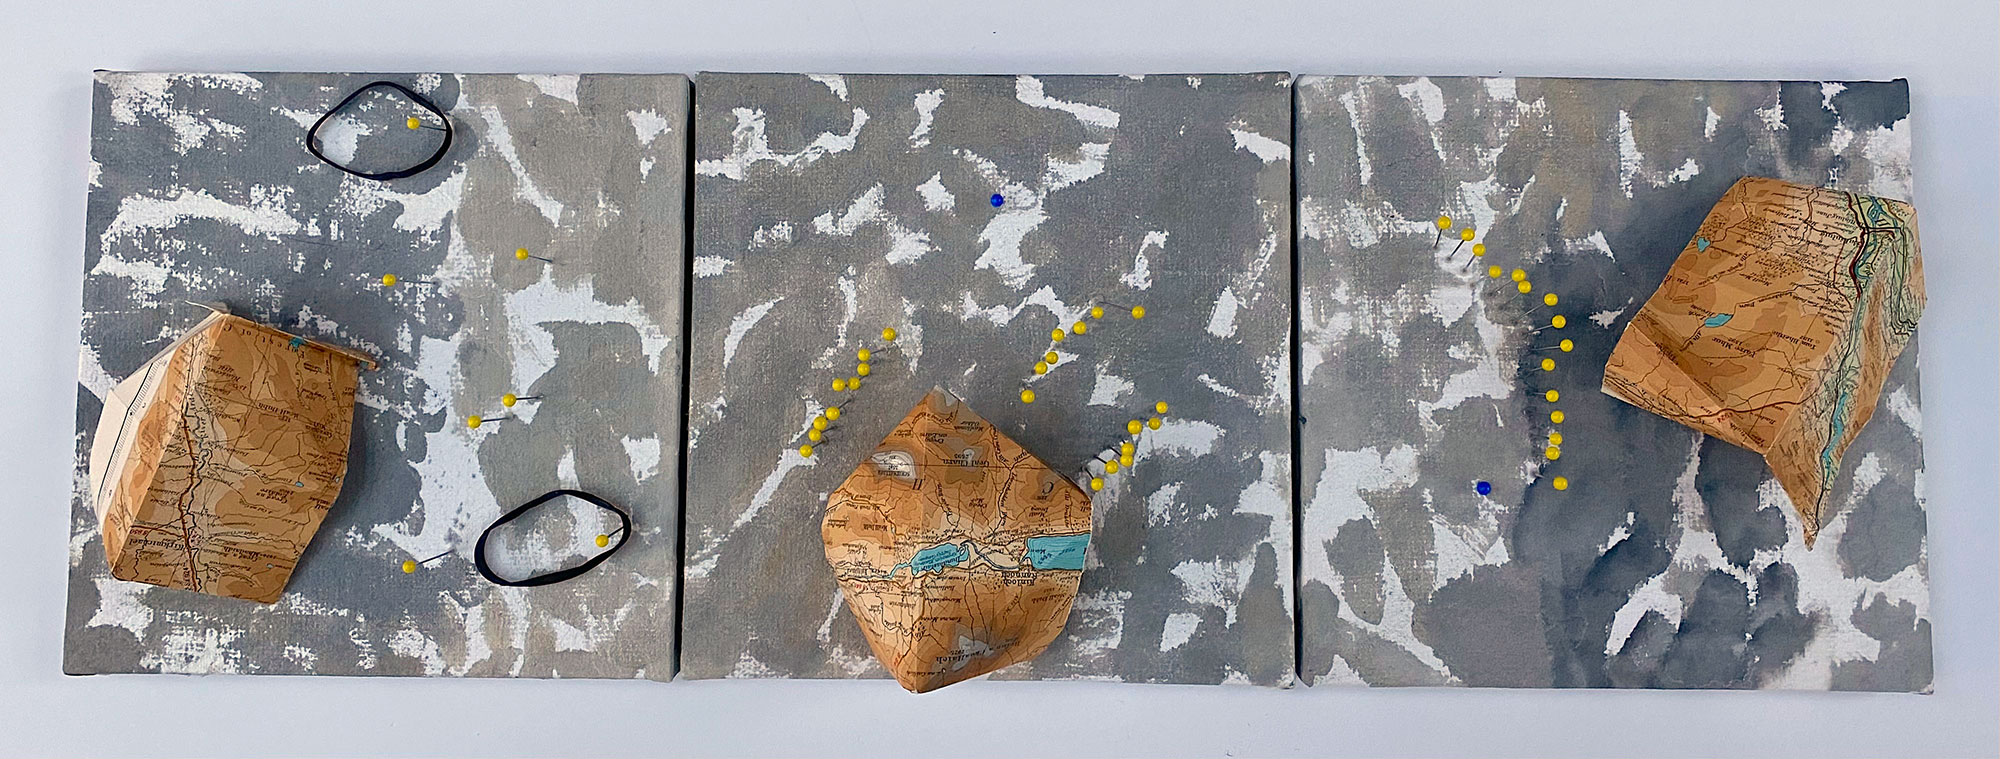 'Pin point', collage found objects on canvas panels, 61x21cm